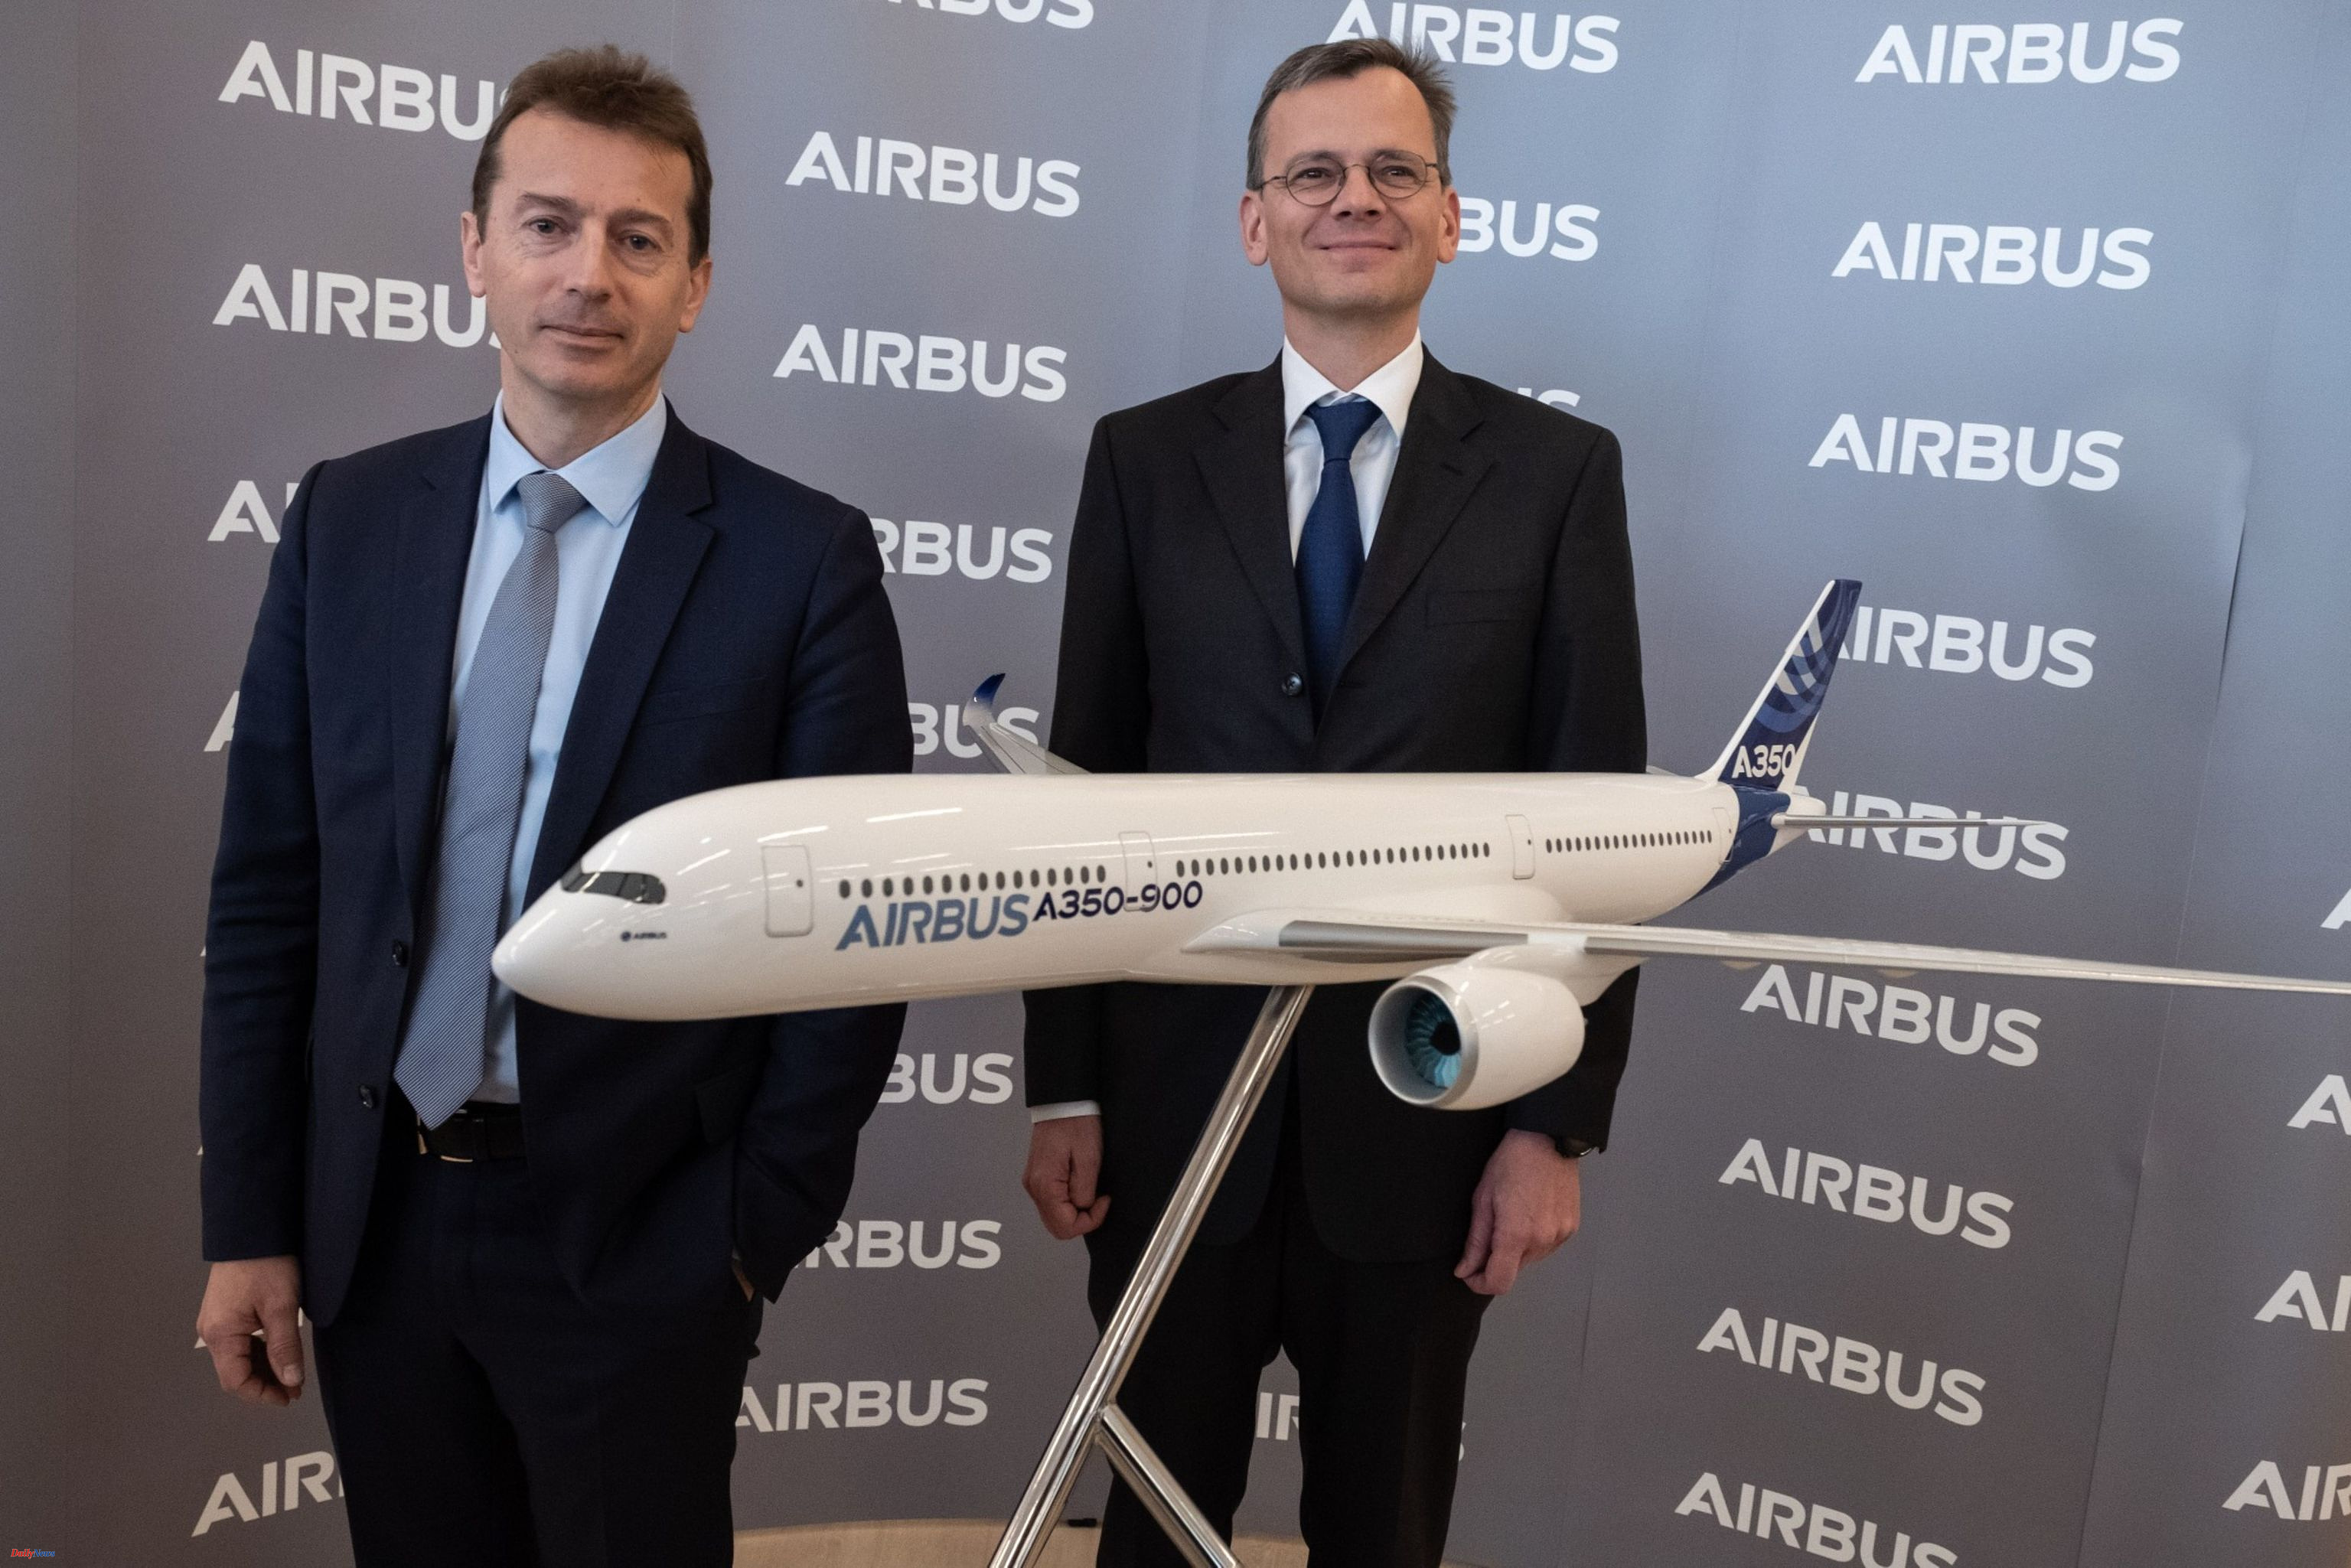 Airbus companies may need state aid for a new aircraft program, according to executive